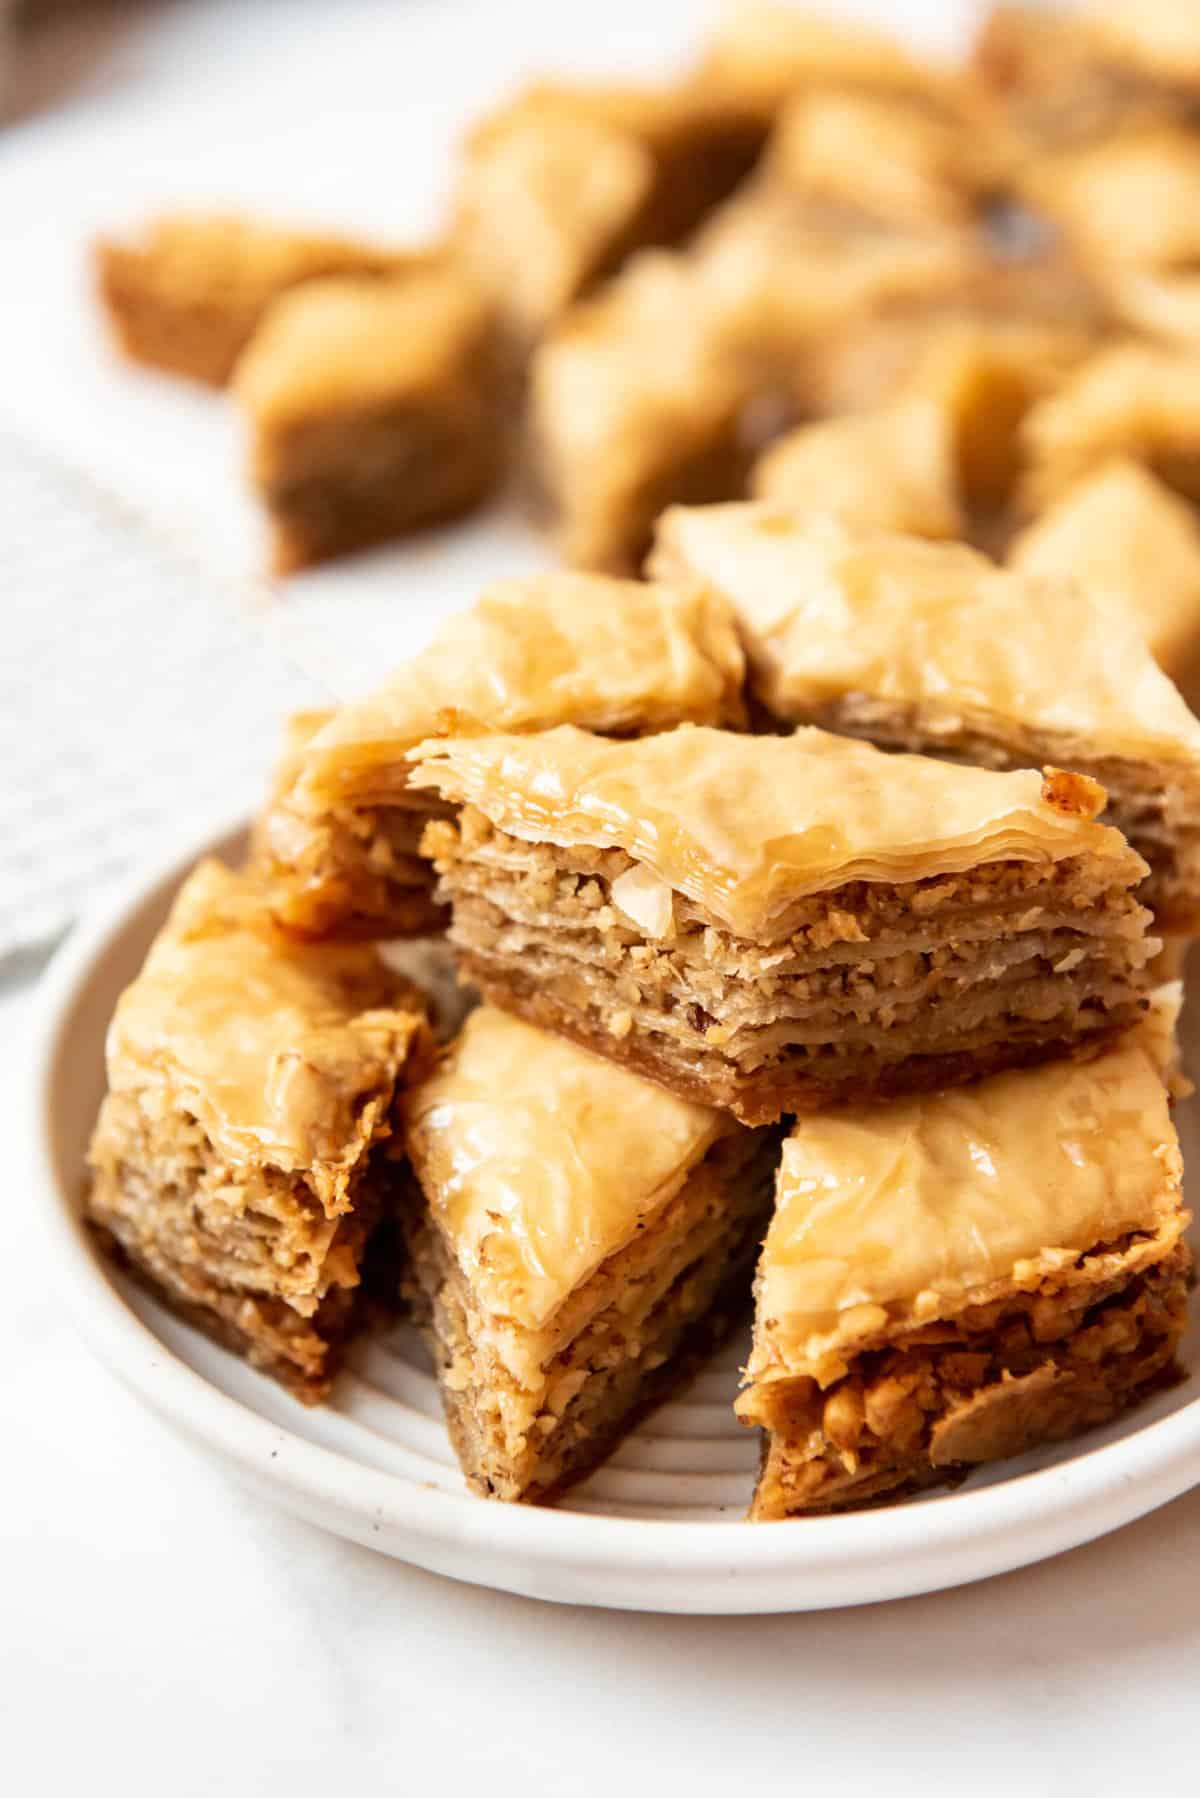 A plate of layered baklava with walnuts and honey syrup.